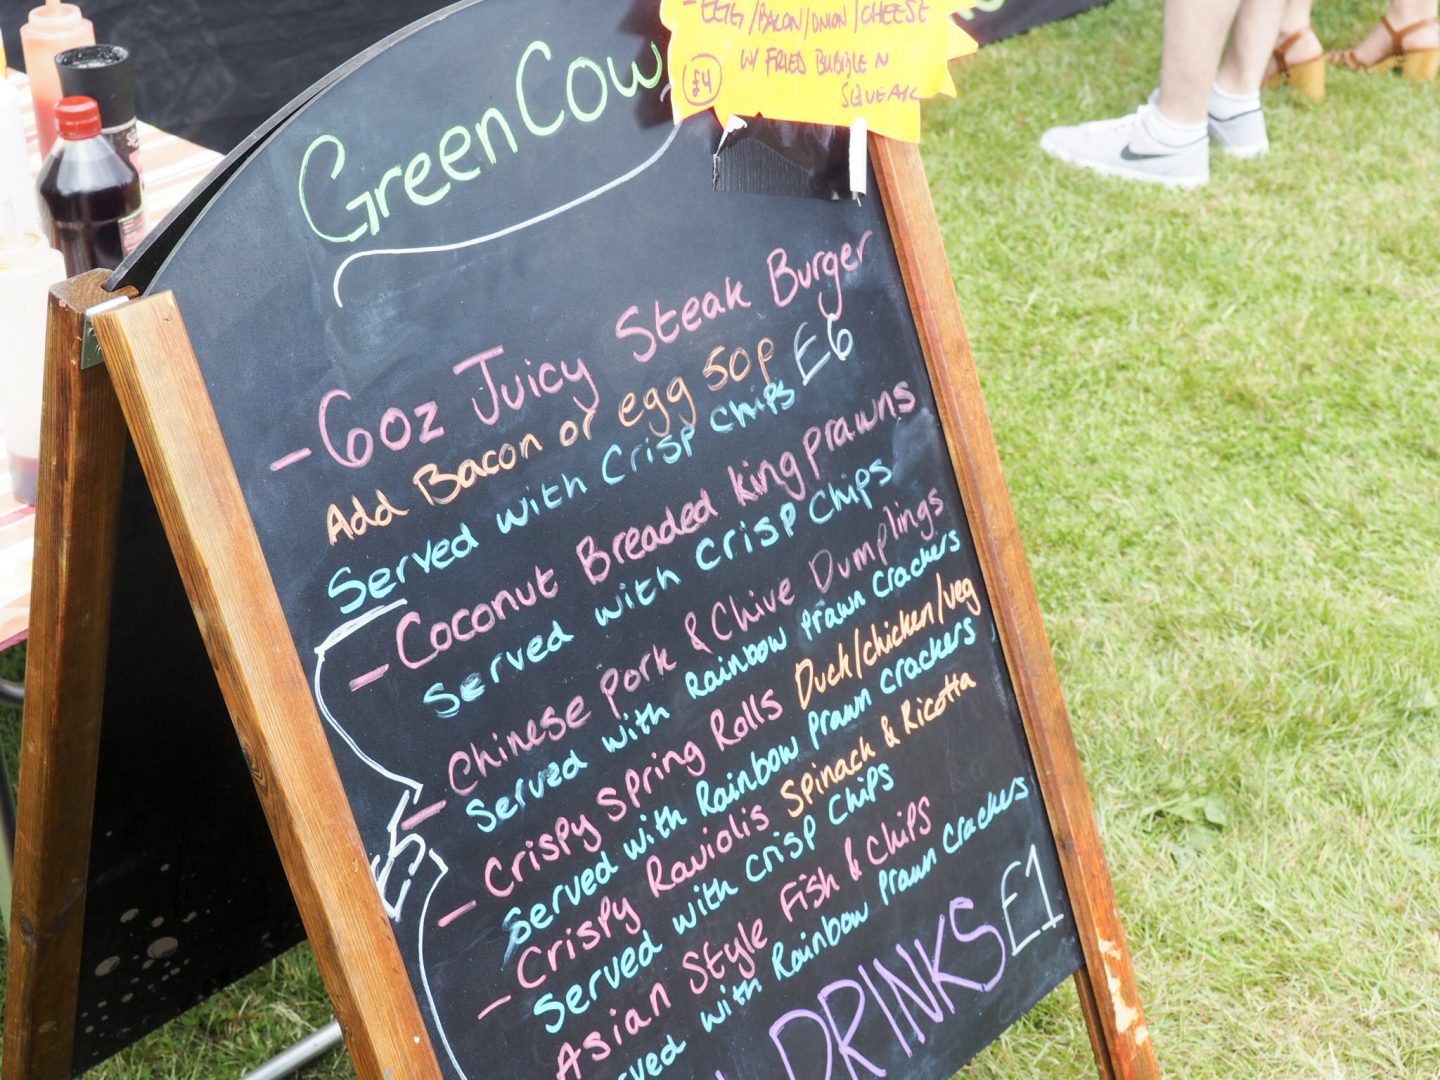 Green Cow Catering